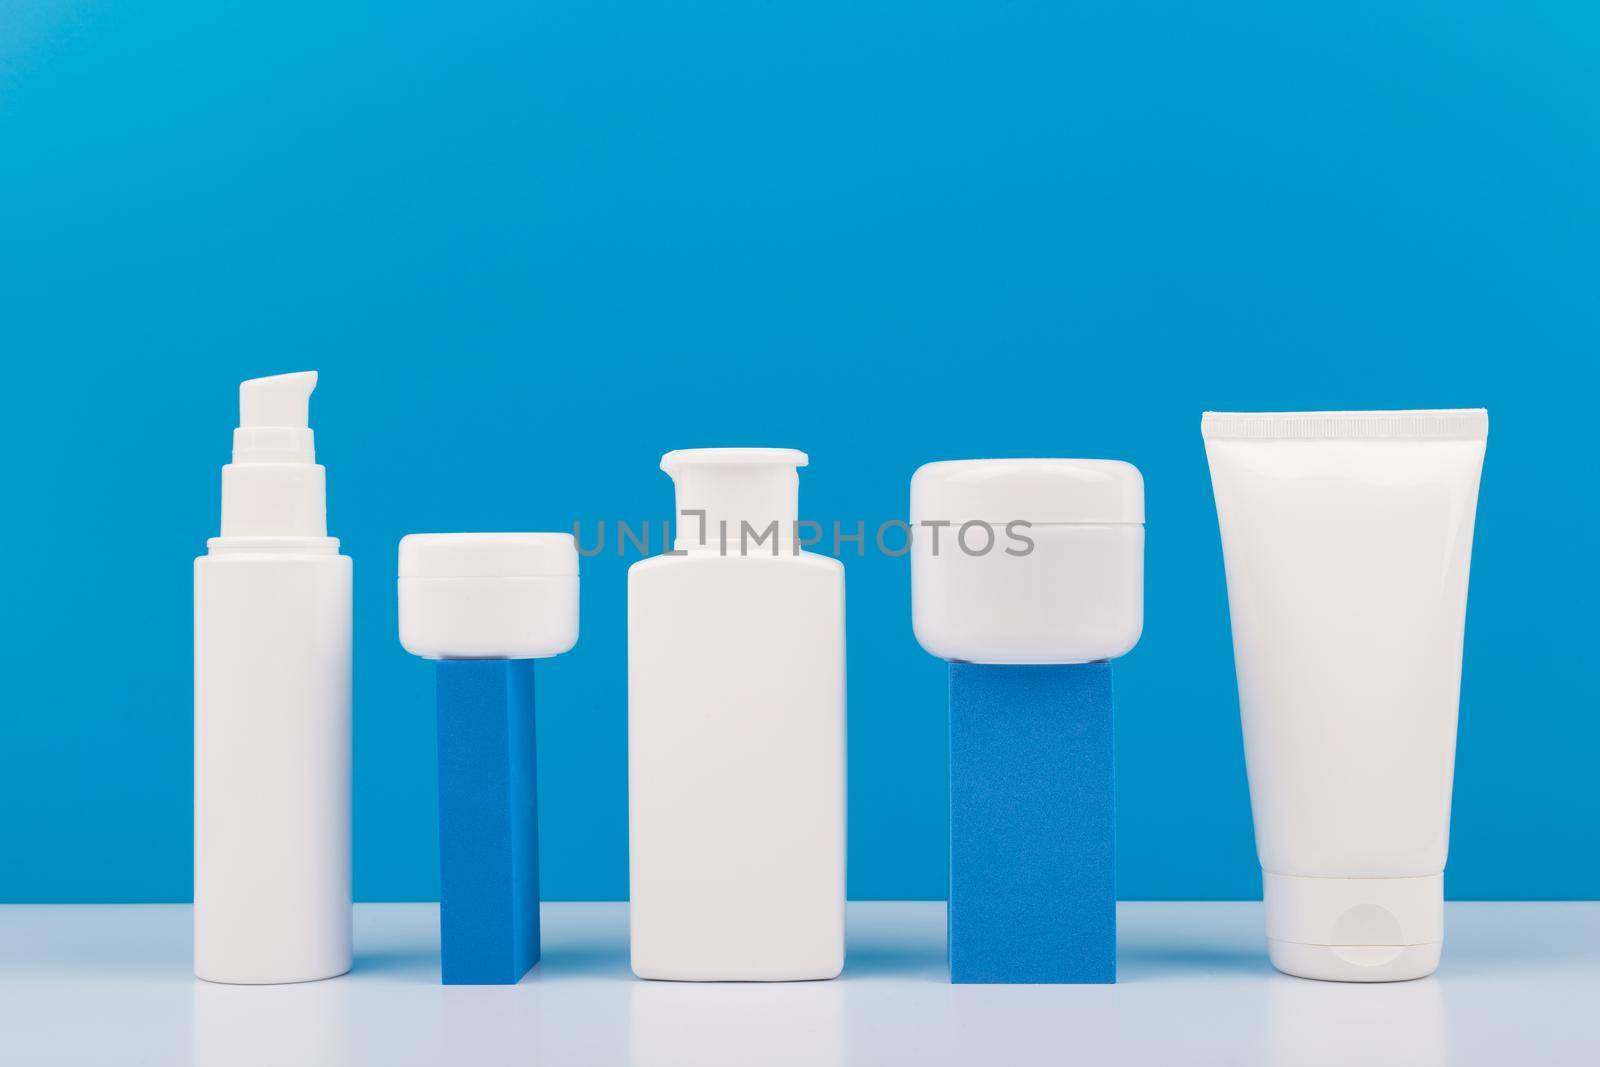 Set of white unbranded cosmetic bottles for daily skincare on geometric props for product presentation against bright blue background. Concept of hygiene, man's skin care or anti acne treatment